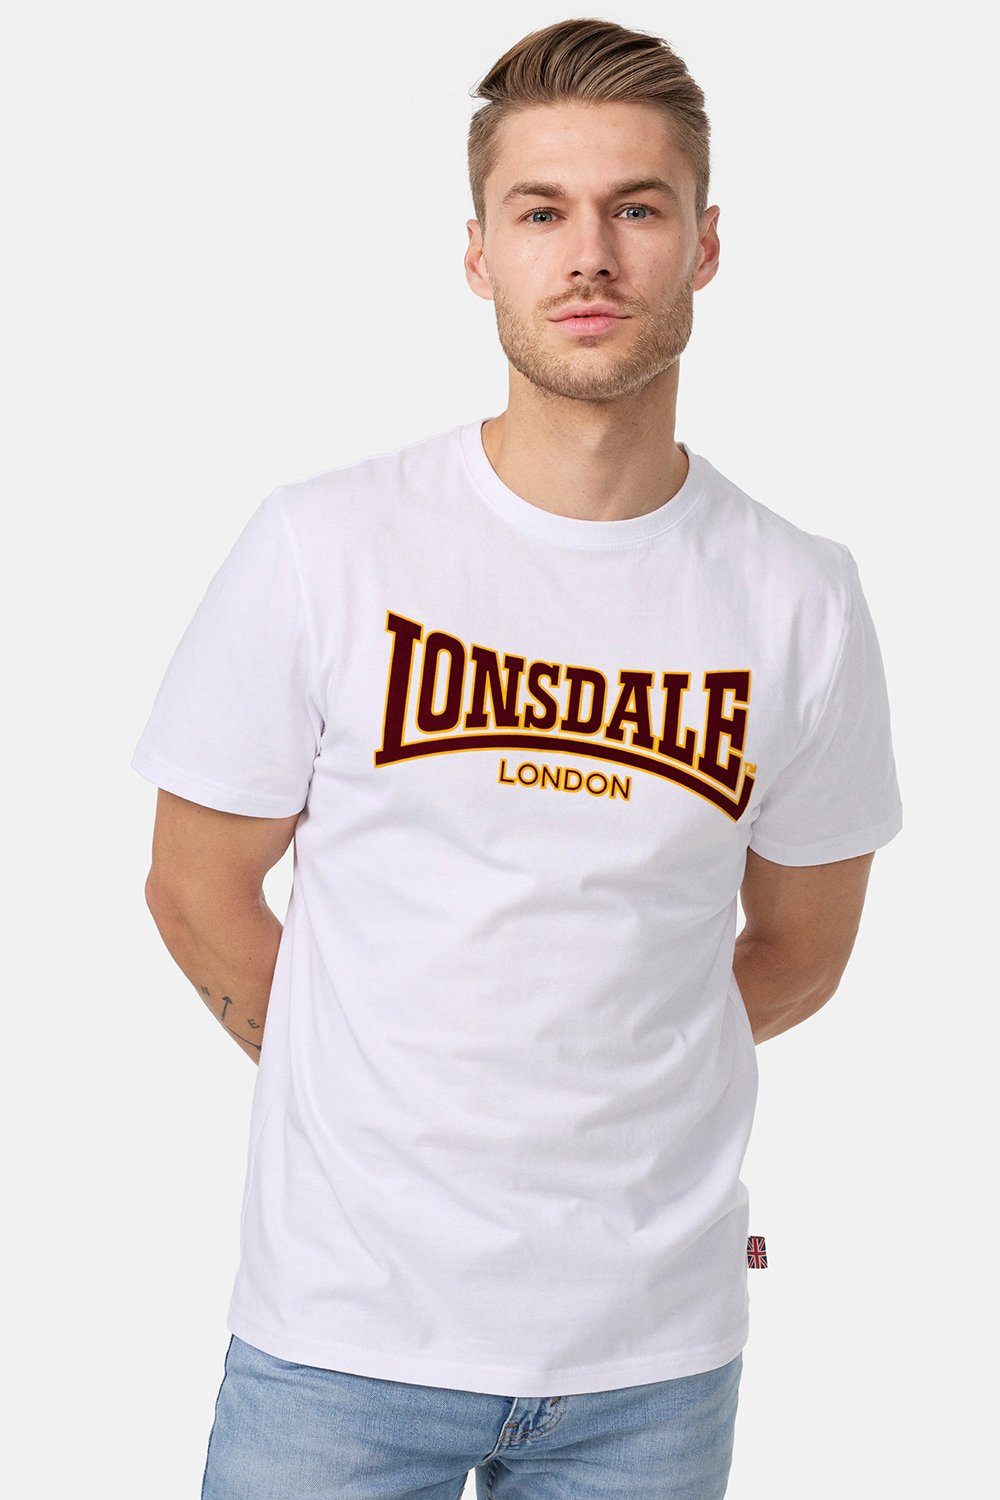 Lonsdale T-Shirt CLASSIC White